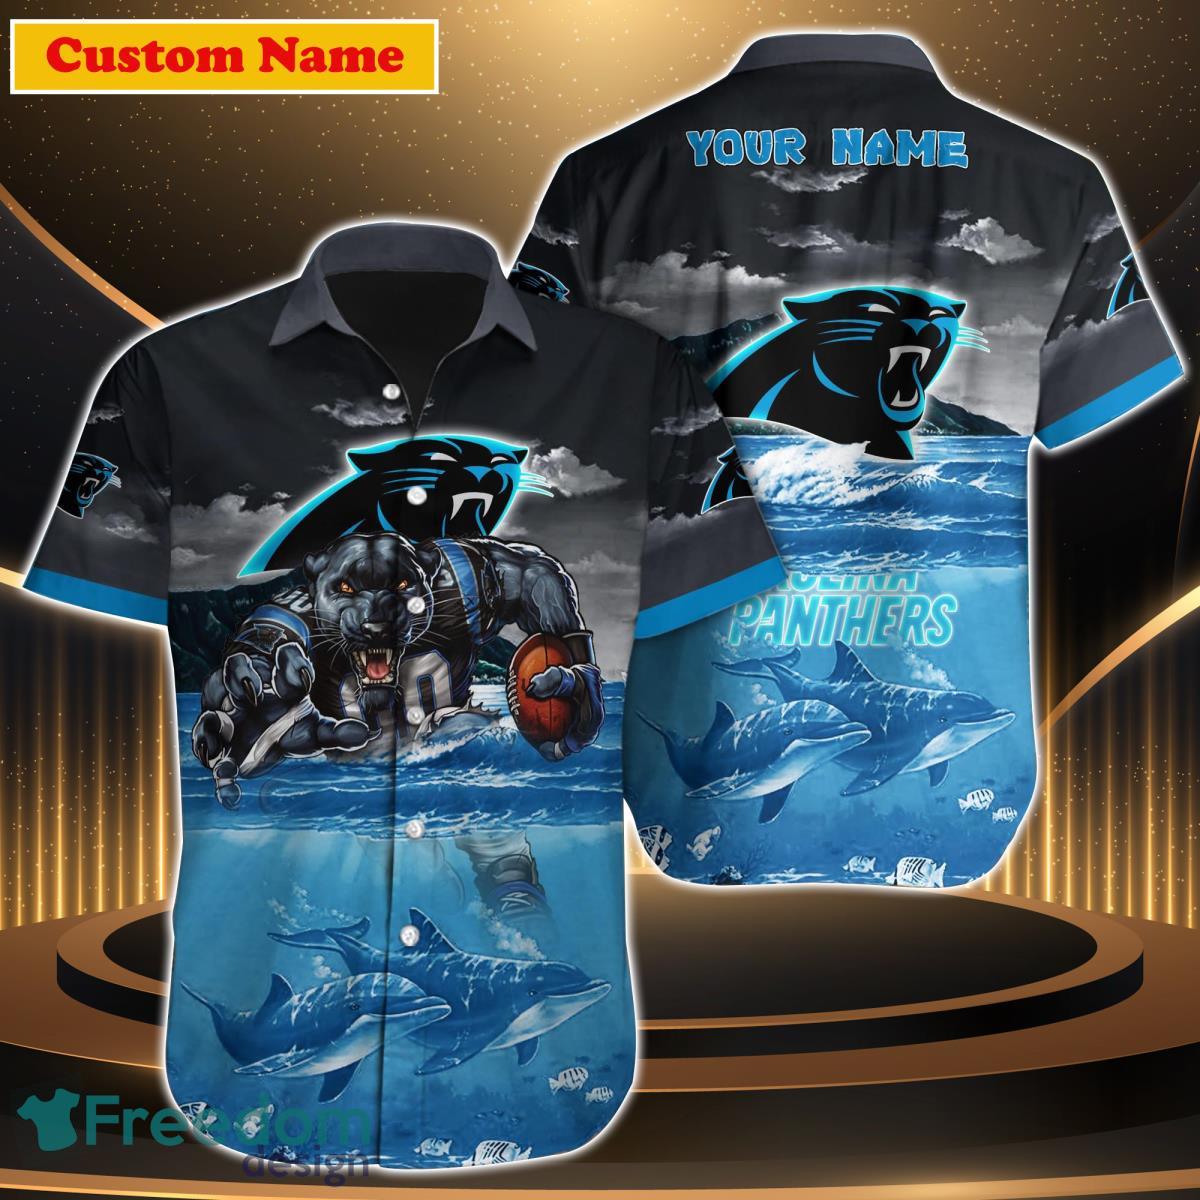 Chicago Bears NFL Custom Name Hawaiian Shirt For Men And Women Special Gift  For Real Fans - Freedomdesign